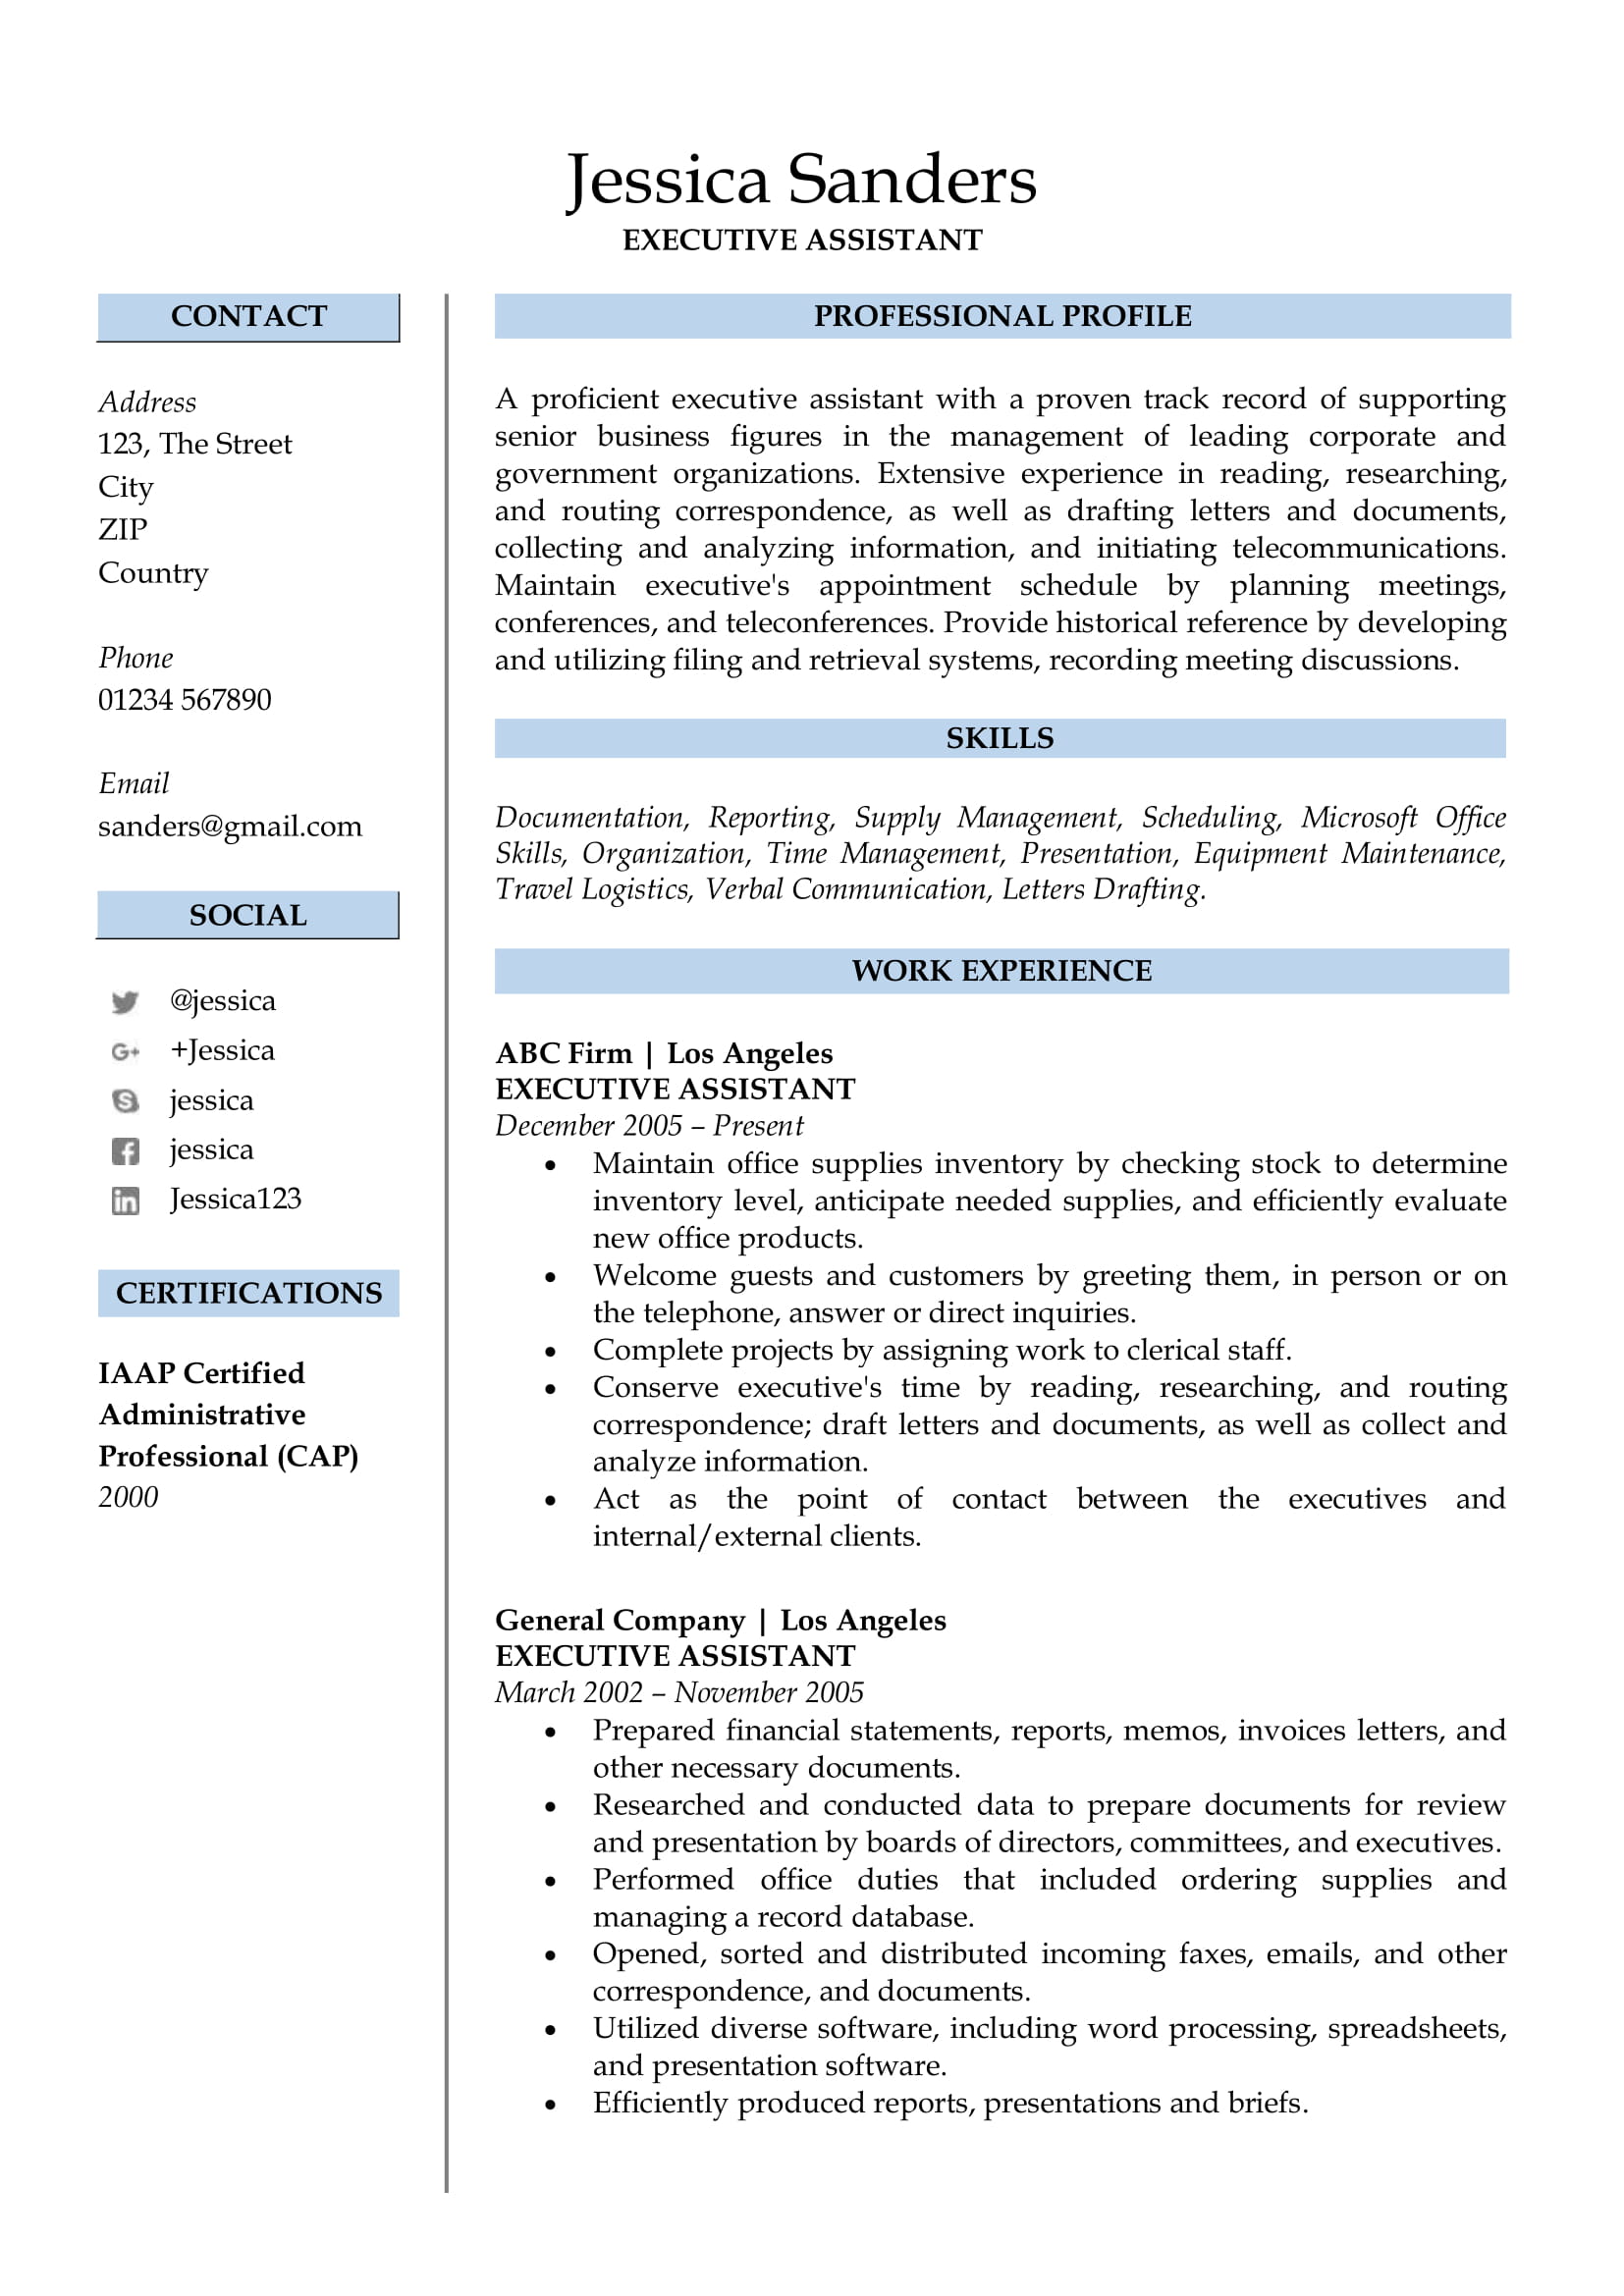 free resume template for experienced professional